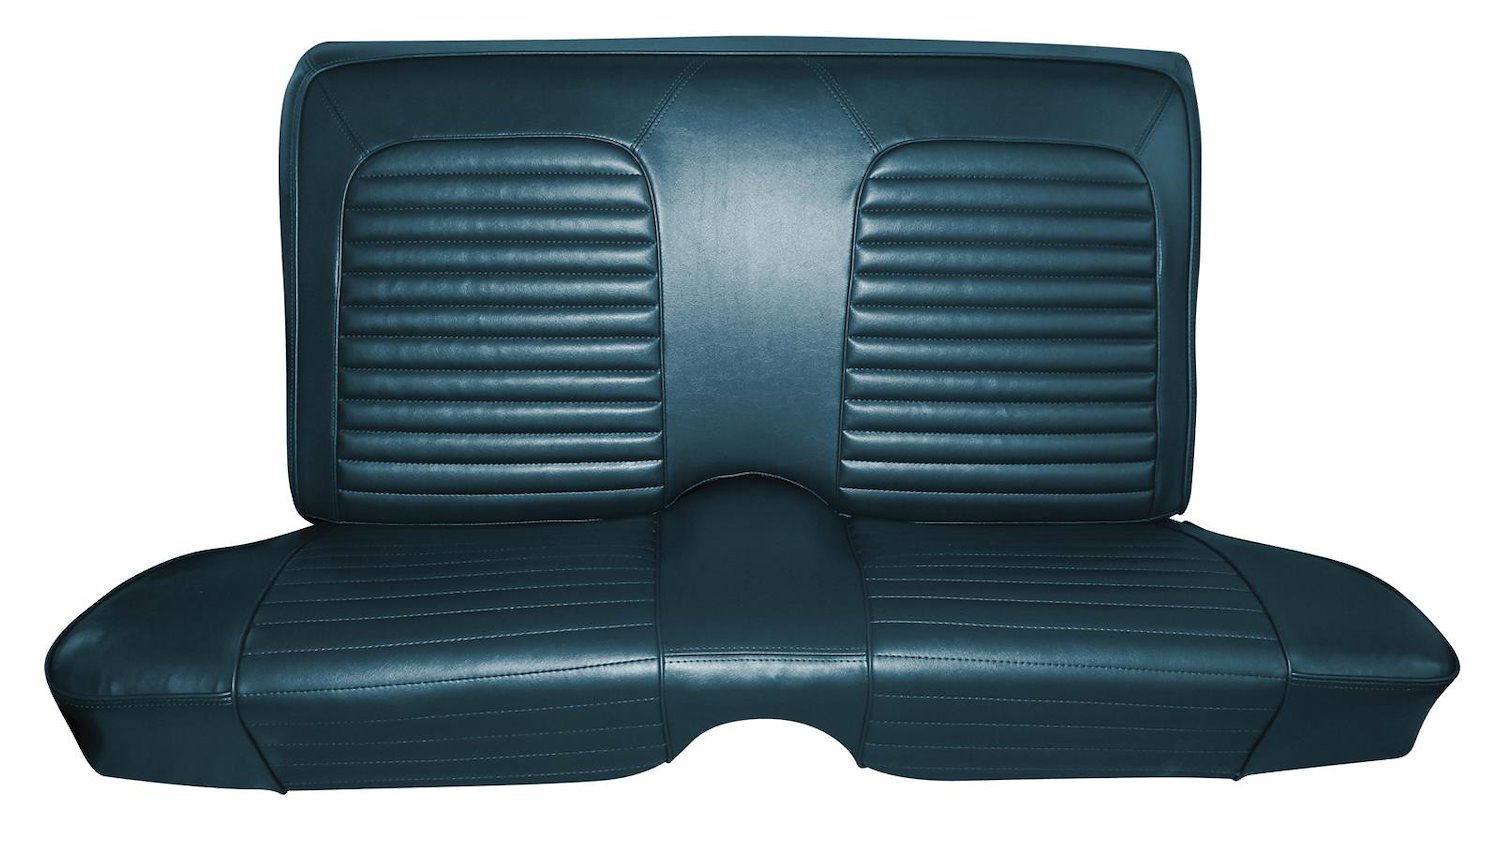 1969 Chevrolet Camaro Houndstooth Interior Optional Rear Fold Down Bench Seat Upholstery Set